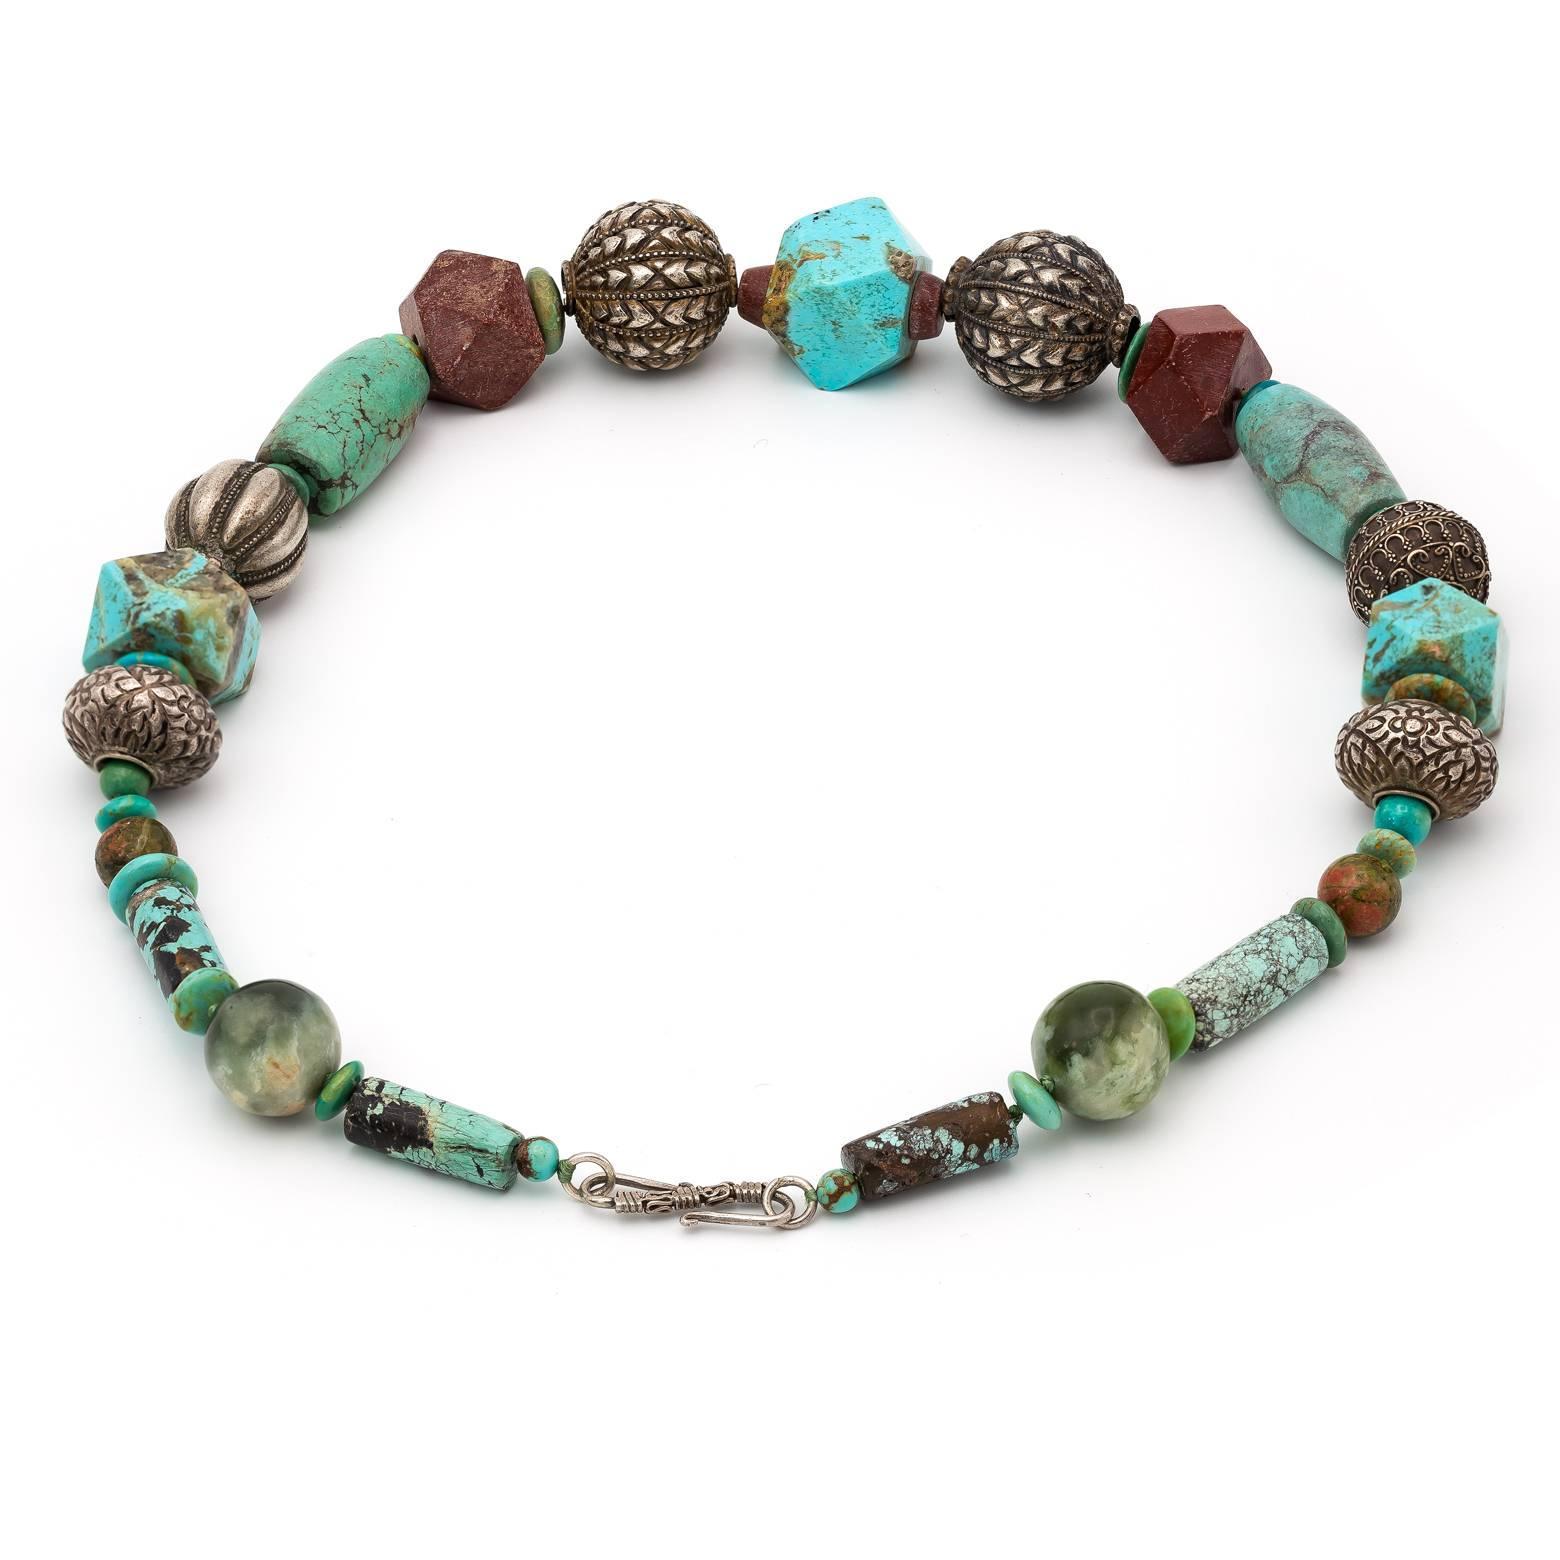 This gorgeous large and substantial beaded necklace is a statement piece that can transform any outfit into something greater. The turquoise and jasper beads are in all shapes and sizes and are complimented so well with the intricately detailed